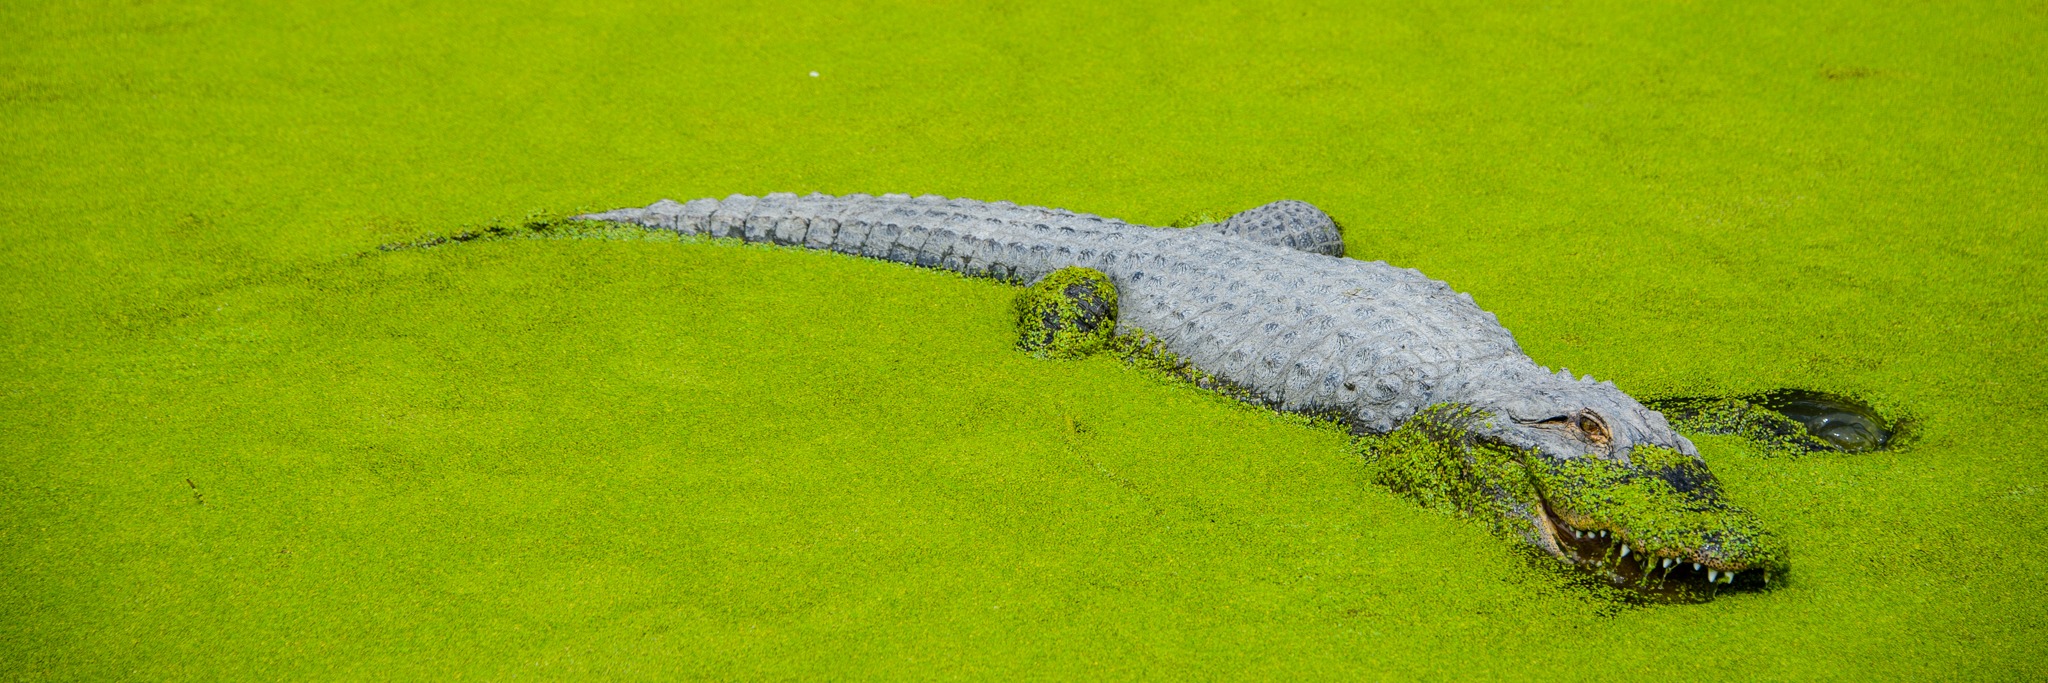 This alligator is snacking on duckweed that grows in one of the large enclosure ponds.